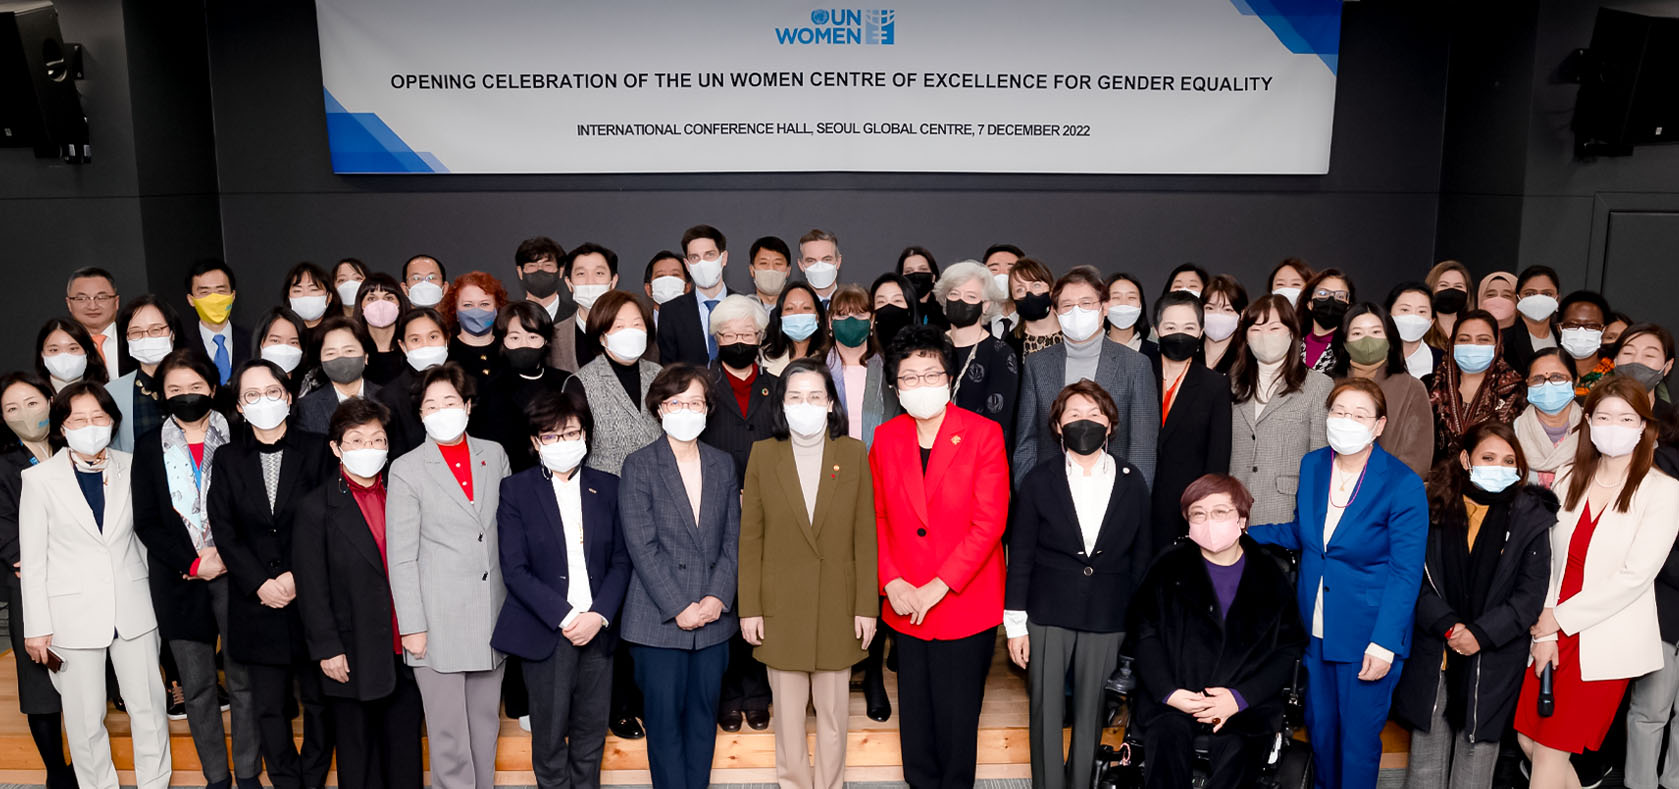 The new UN Women office in the Republic of Korea convened its partners today to advance gender equality in the Asia-Pacific region. Photo: UN Women/Jaeki Kim